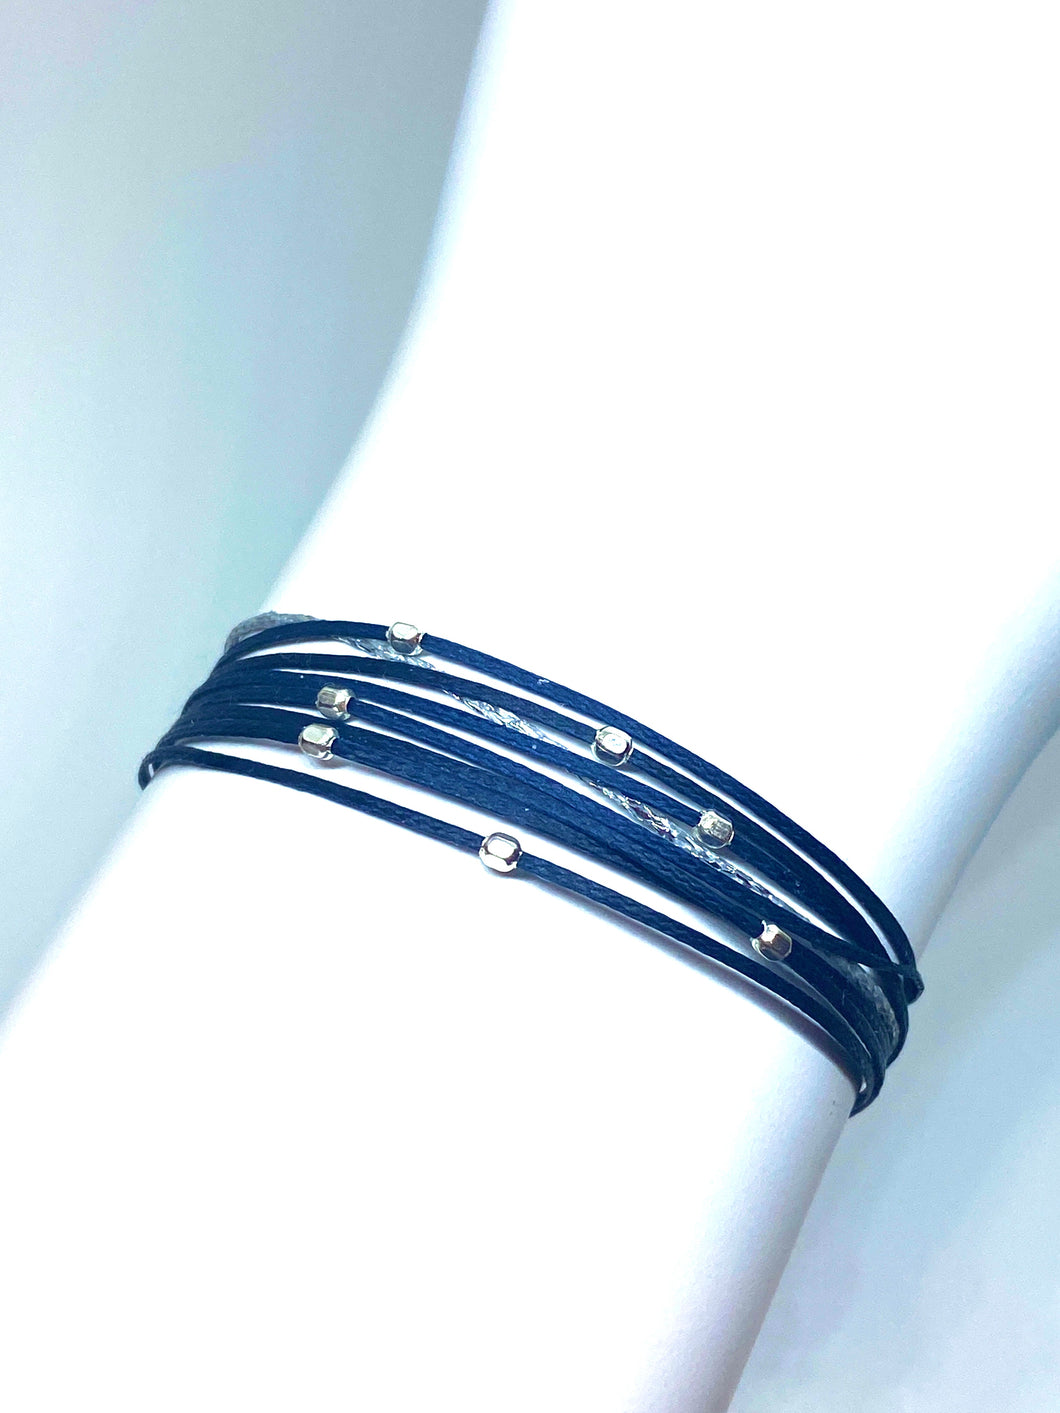 Sterling silver featured in navy